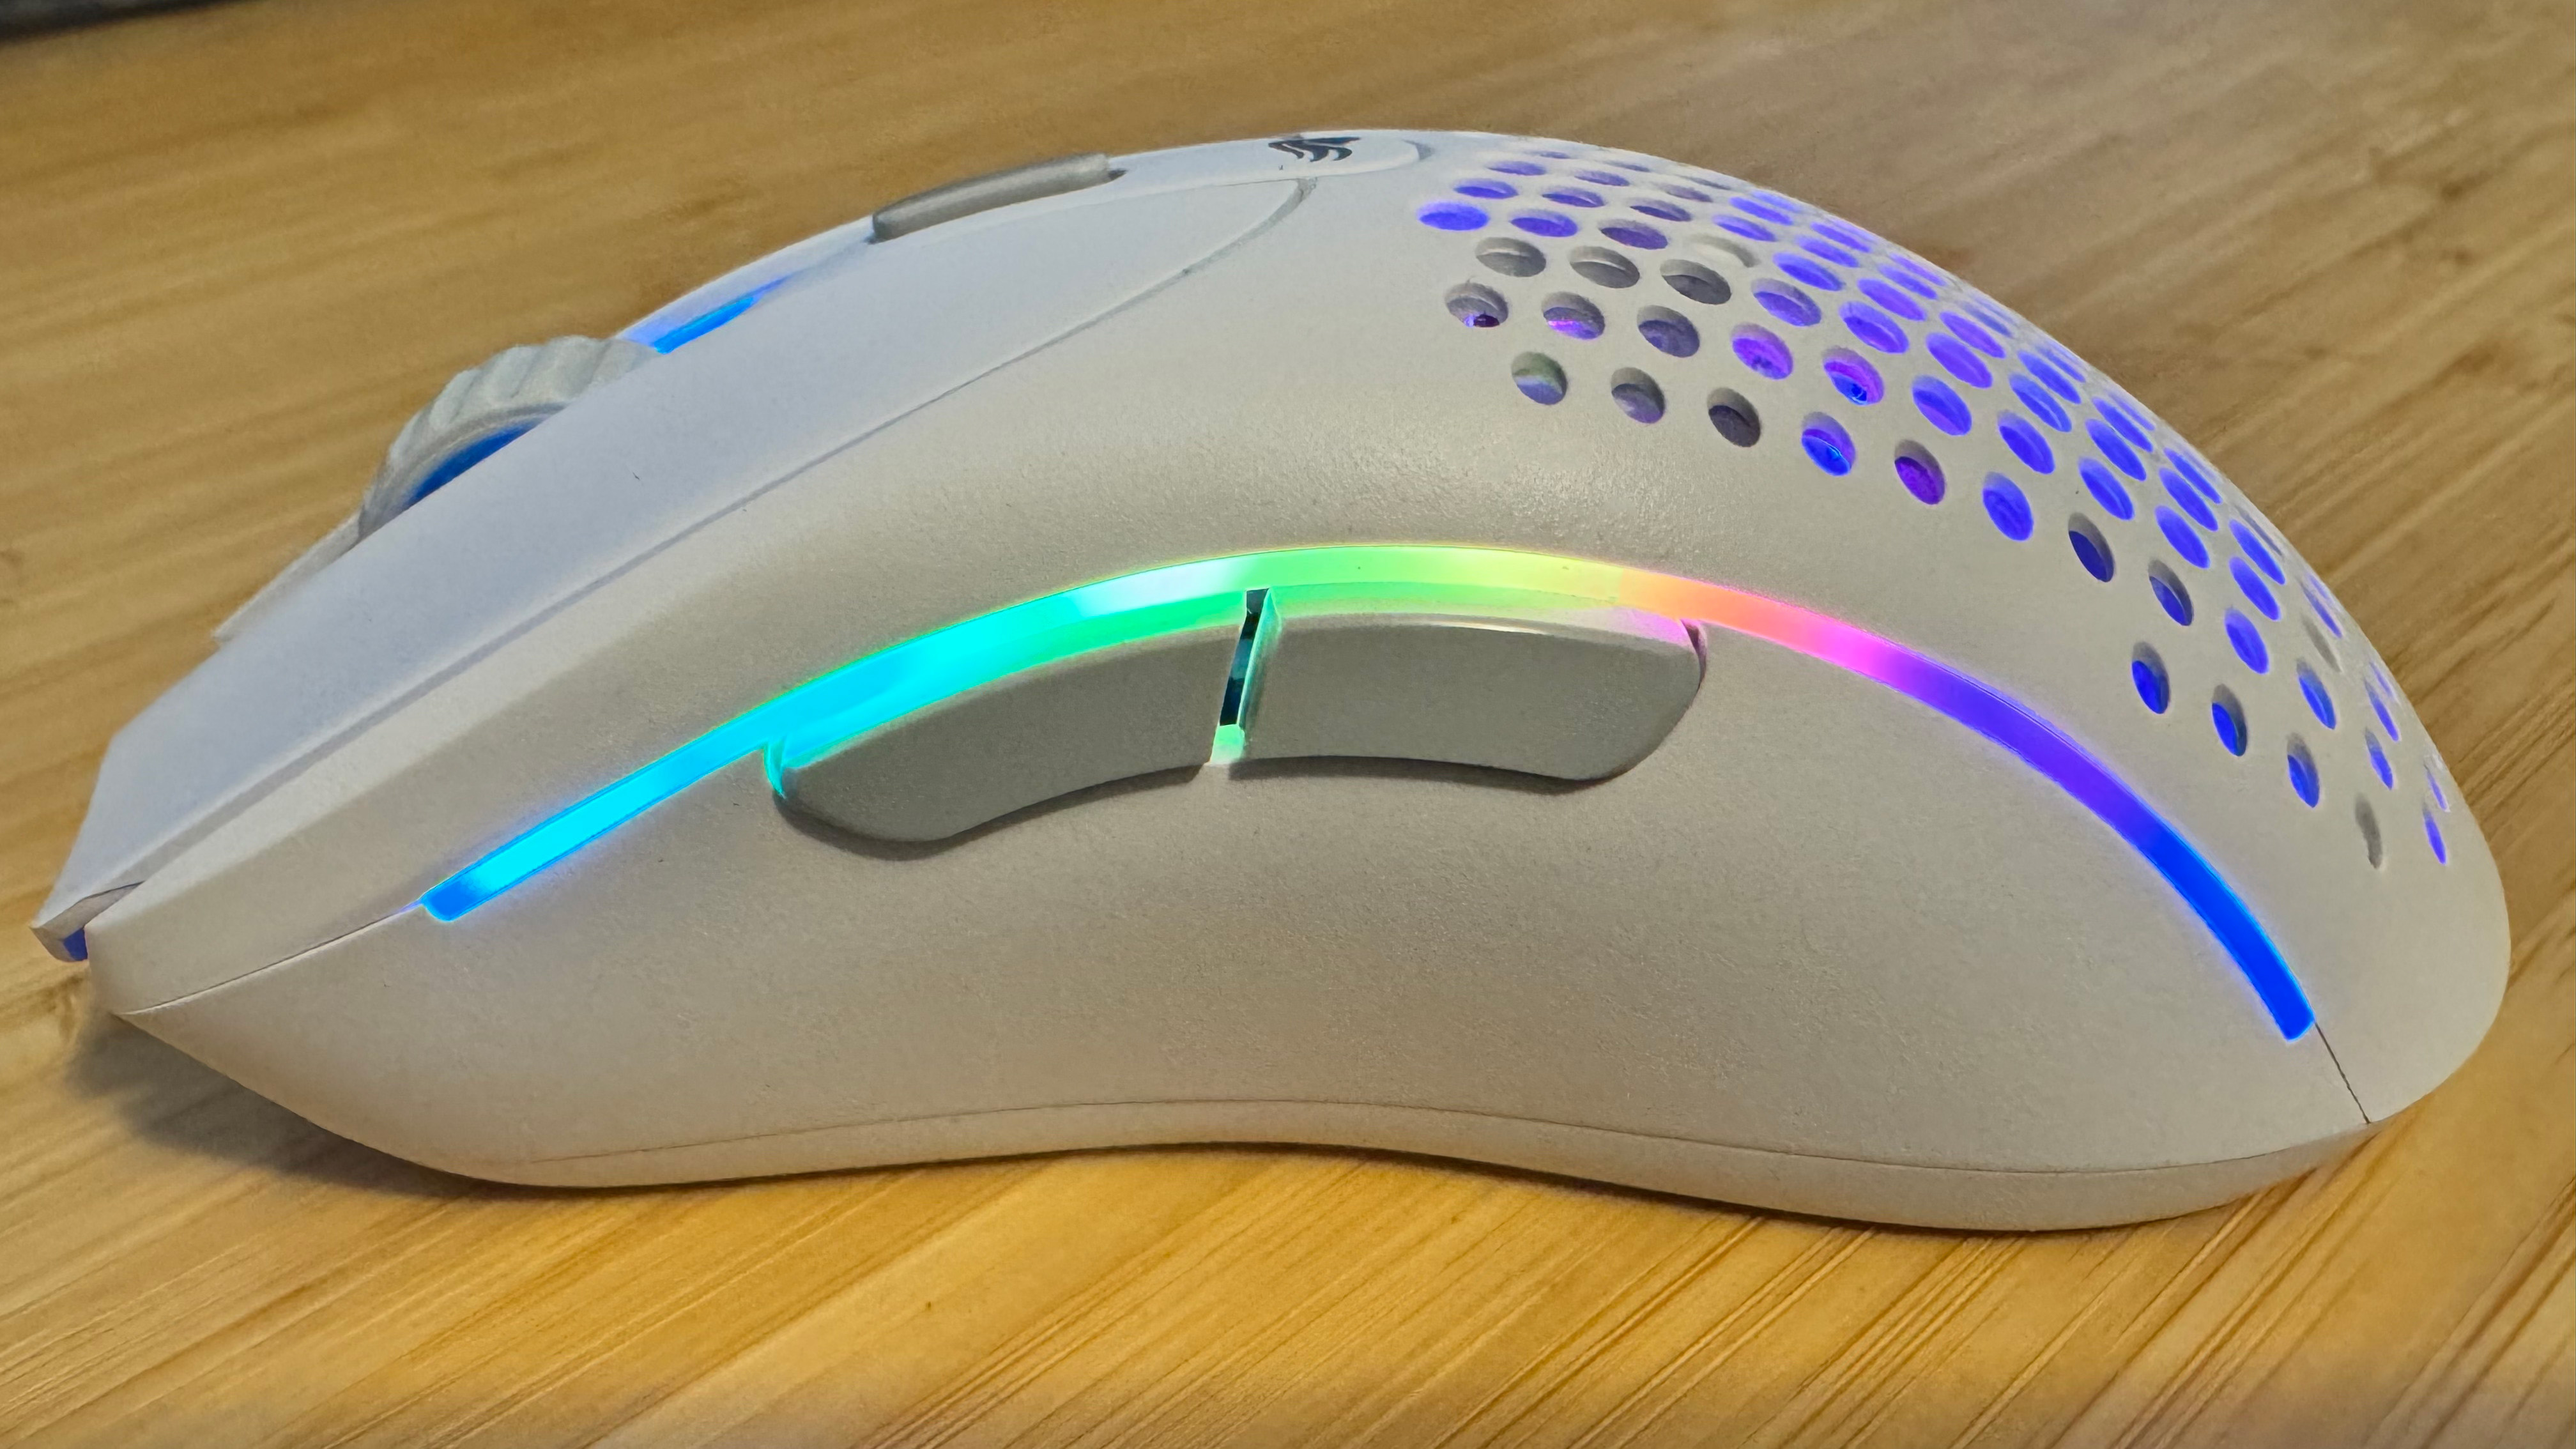 Glorious Model D 2 gaming mouse with RGB enabled.